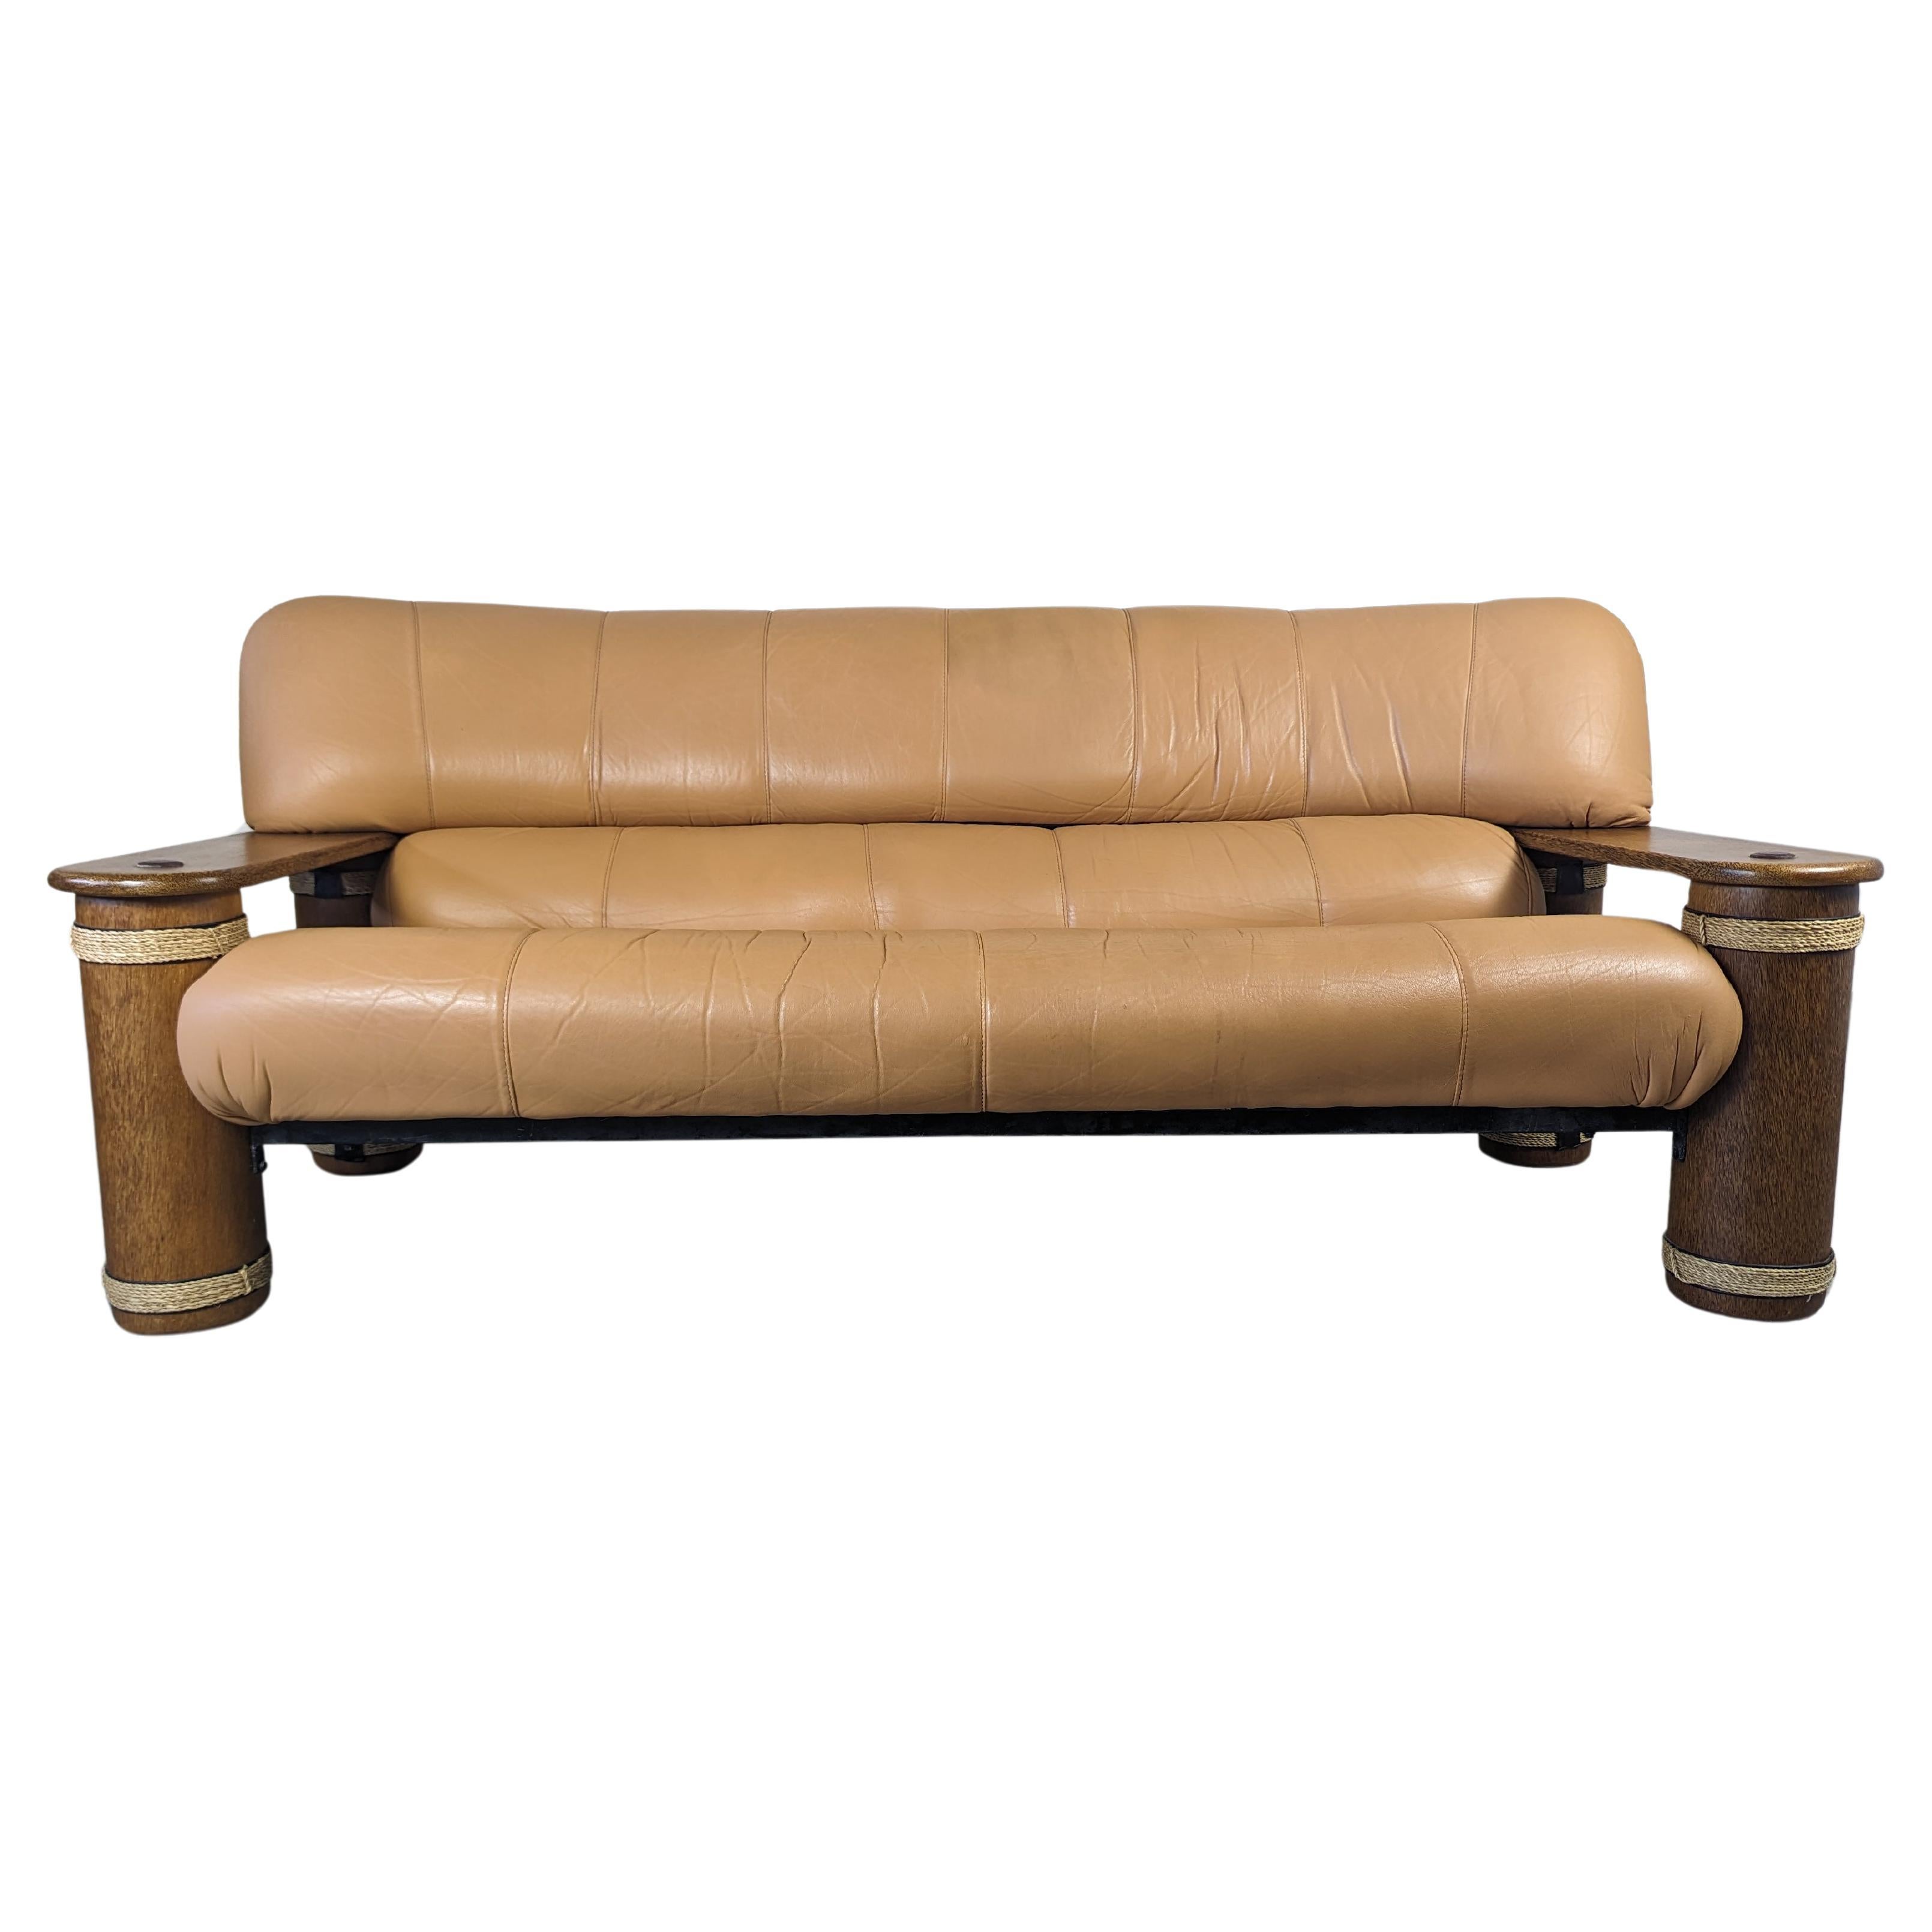 Vintage Leather and Palmwood Three-Seat Sofa by Pacific Green, c1990s For Sale